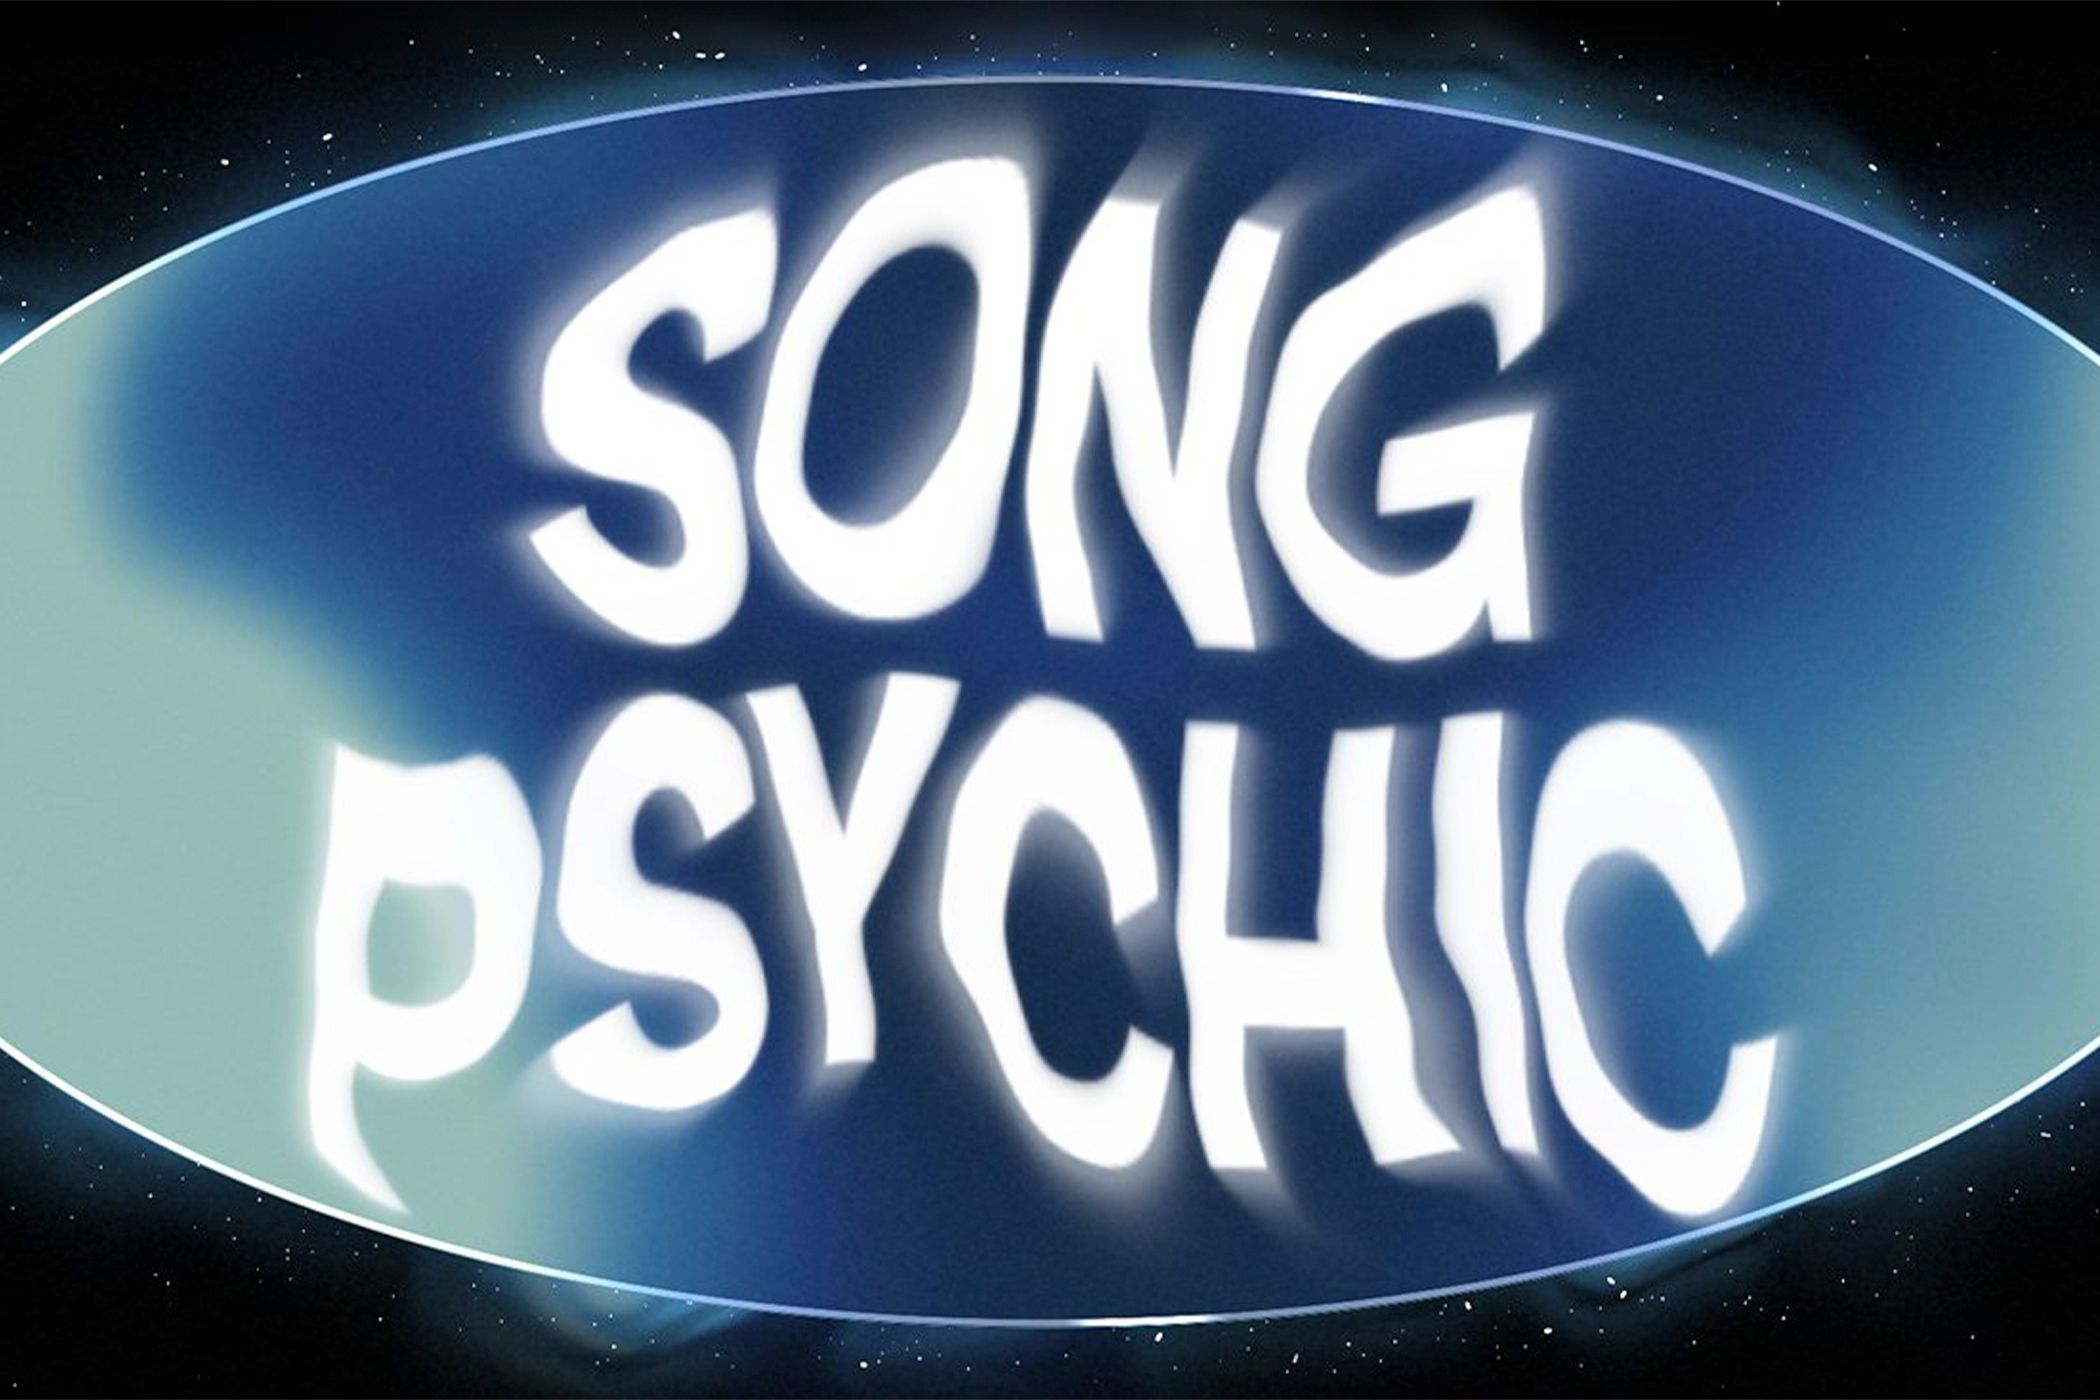 The Spotify Song Psychic logo.